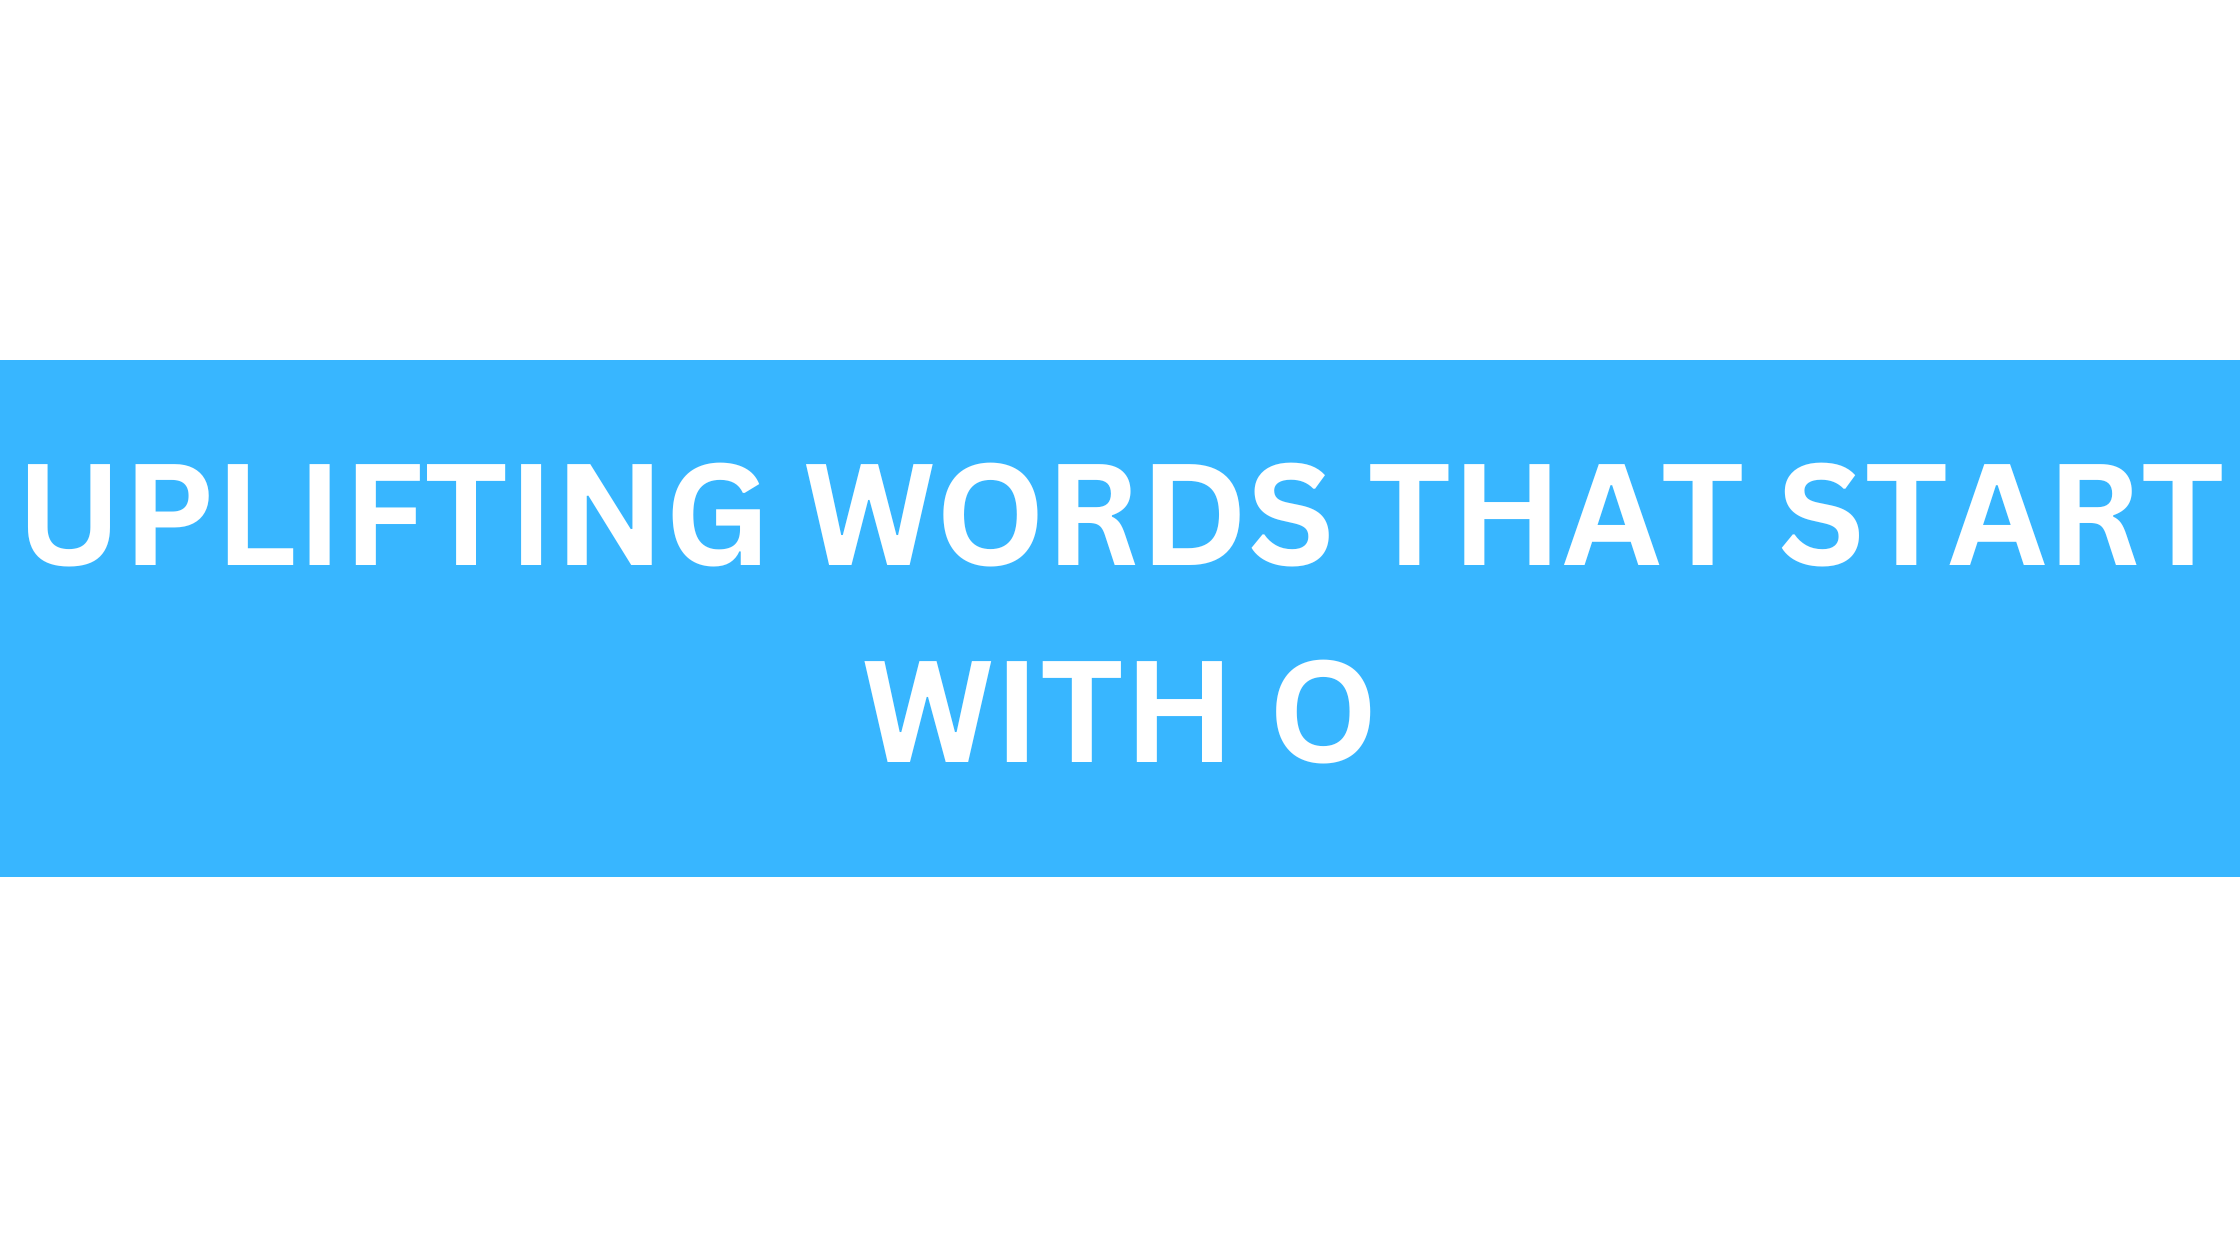 uplifting words that start with o